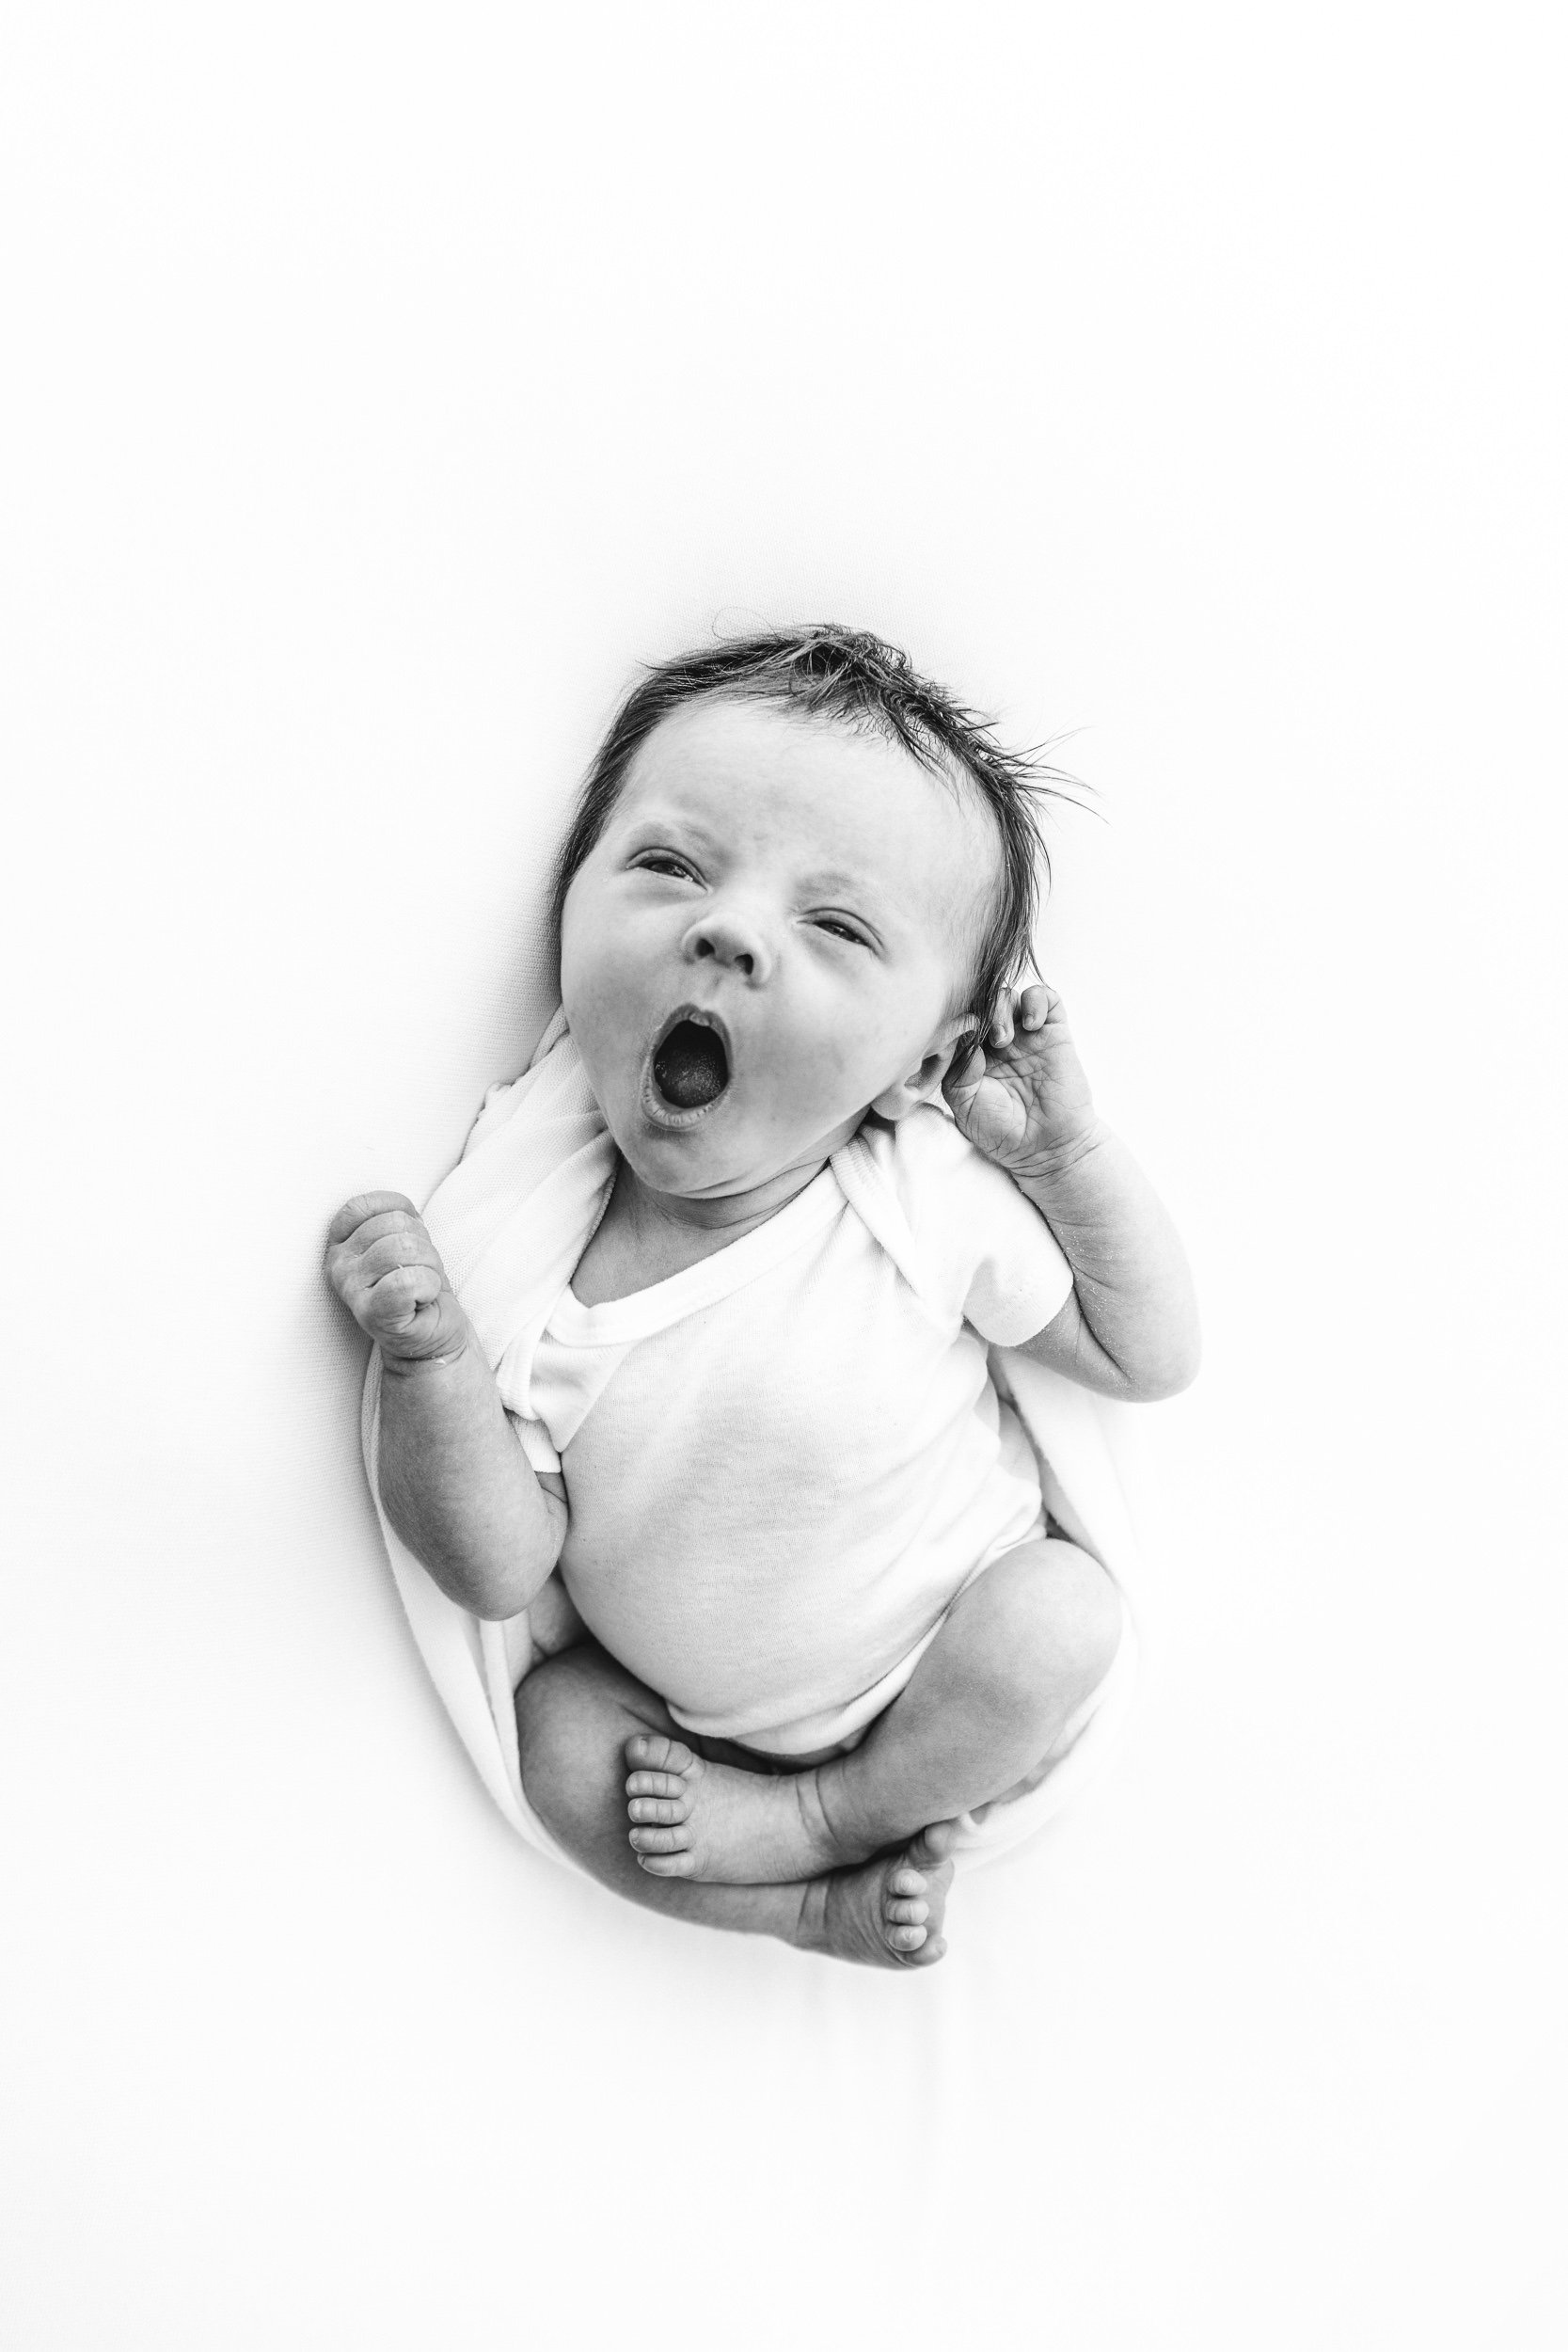  A baby girl yawns during a newborn session in the New Jersey area by Nicole Hawkins Photography. yawning baby with hair #NicoleHawkinsPhotography #NicoleHawkinsNewborns #StudioPhotography #NewYorkPhotographer #NJphotographers #newborn 